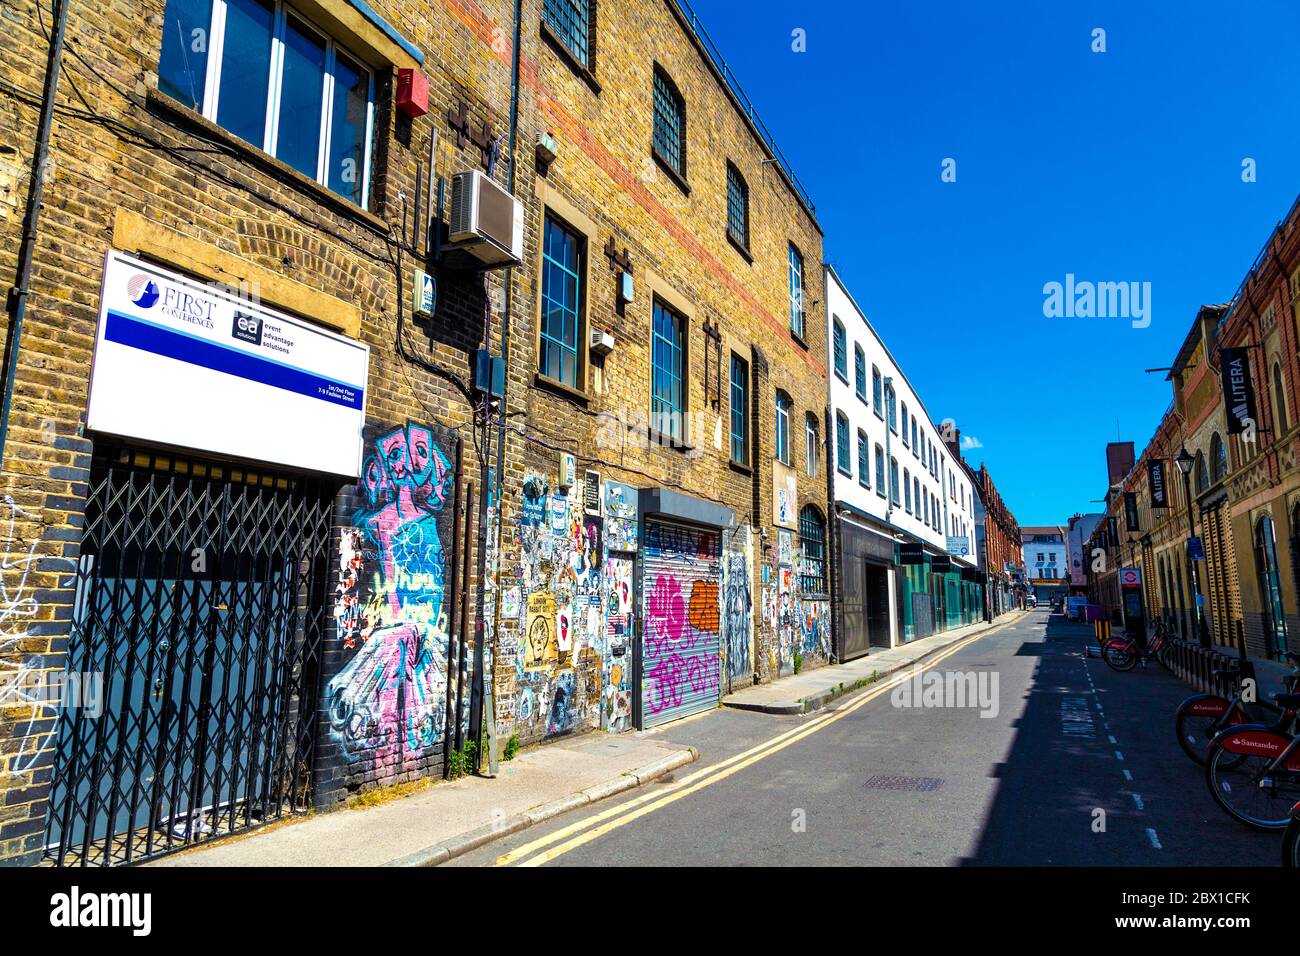 Brick wall covered with graffiti, tags and posters in Fashion Street, Spitalfields, London, UK Stock Photo